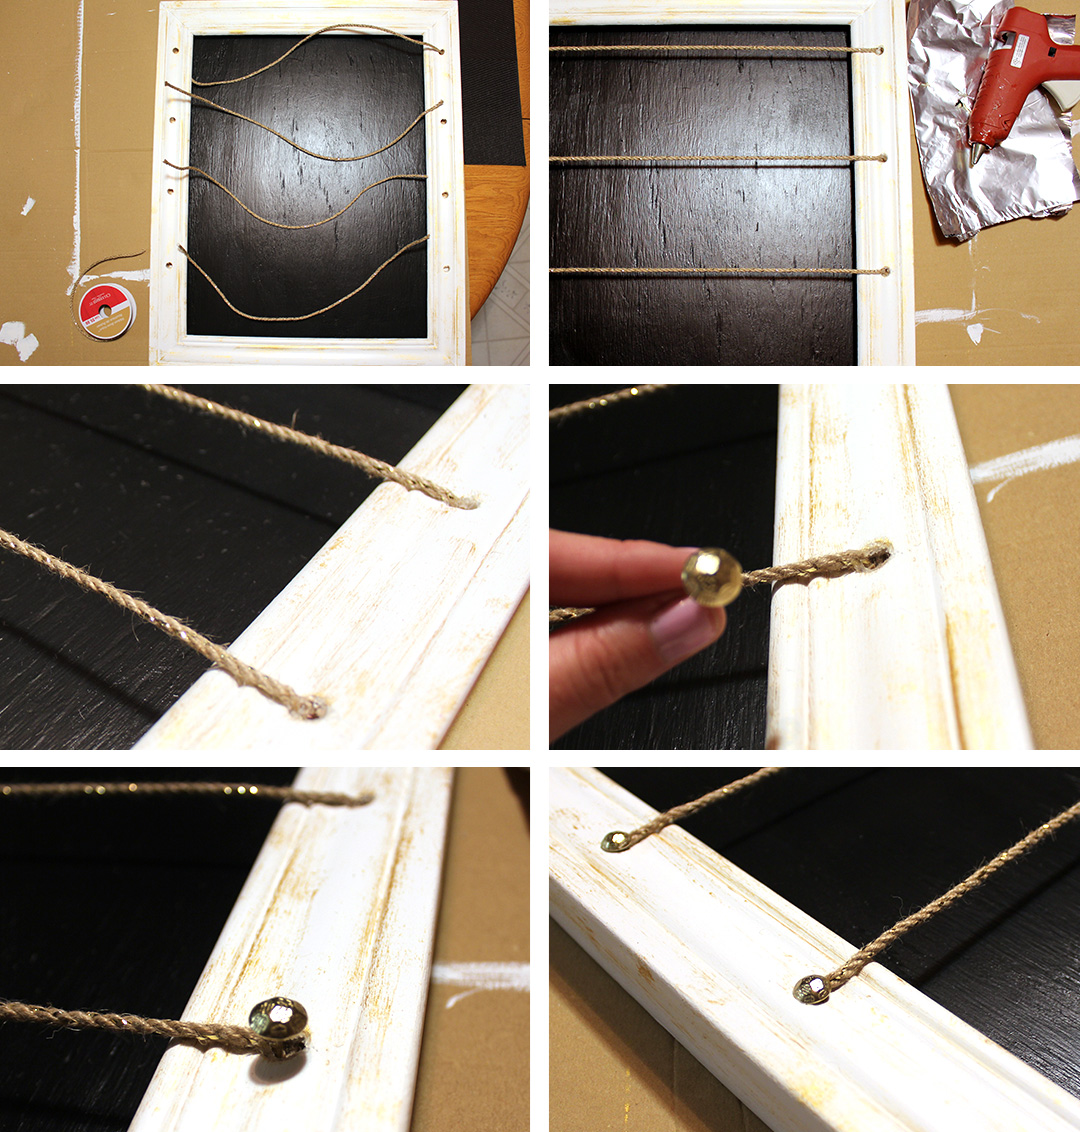 Step 9: Add the clothesline string and decorative upholstery pins.